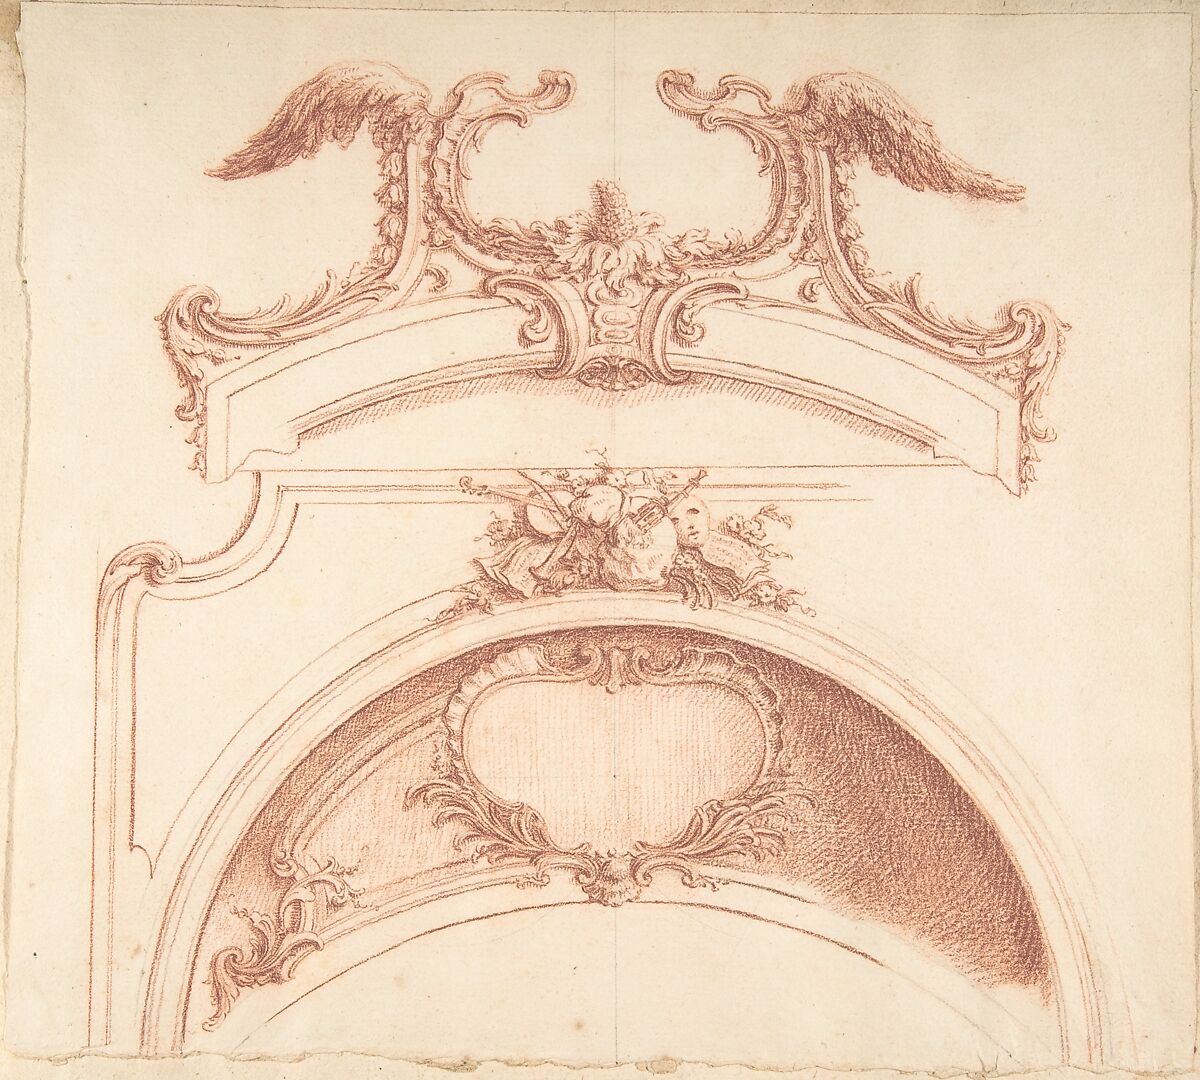 Preparatory Studies for Plates 90 and 91 of "Maisons de plaisance," Volume II, Jacques François Blondel (French, Rouen 1705–1774 Paris), Red chalk over traces of black chalk. Horizontal black-chalk line at center, and round compass marks in black chalk on lower drawing 